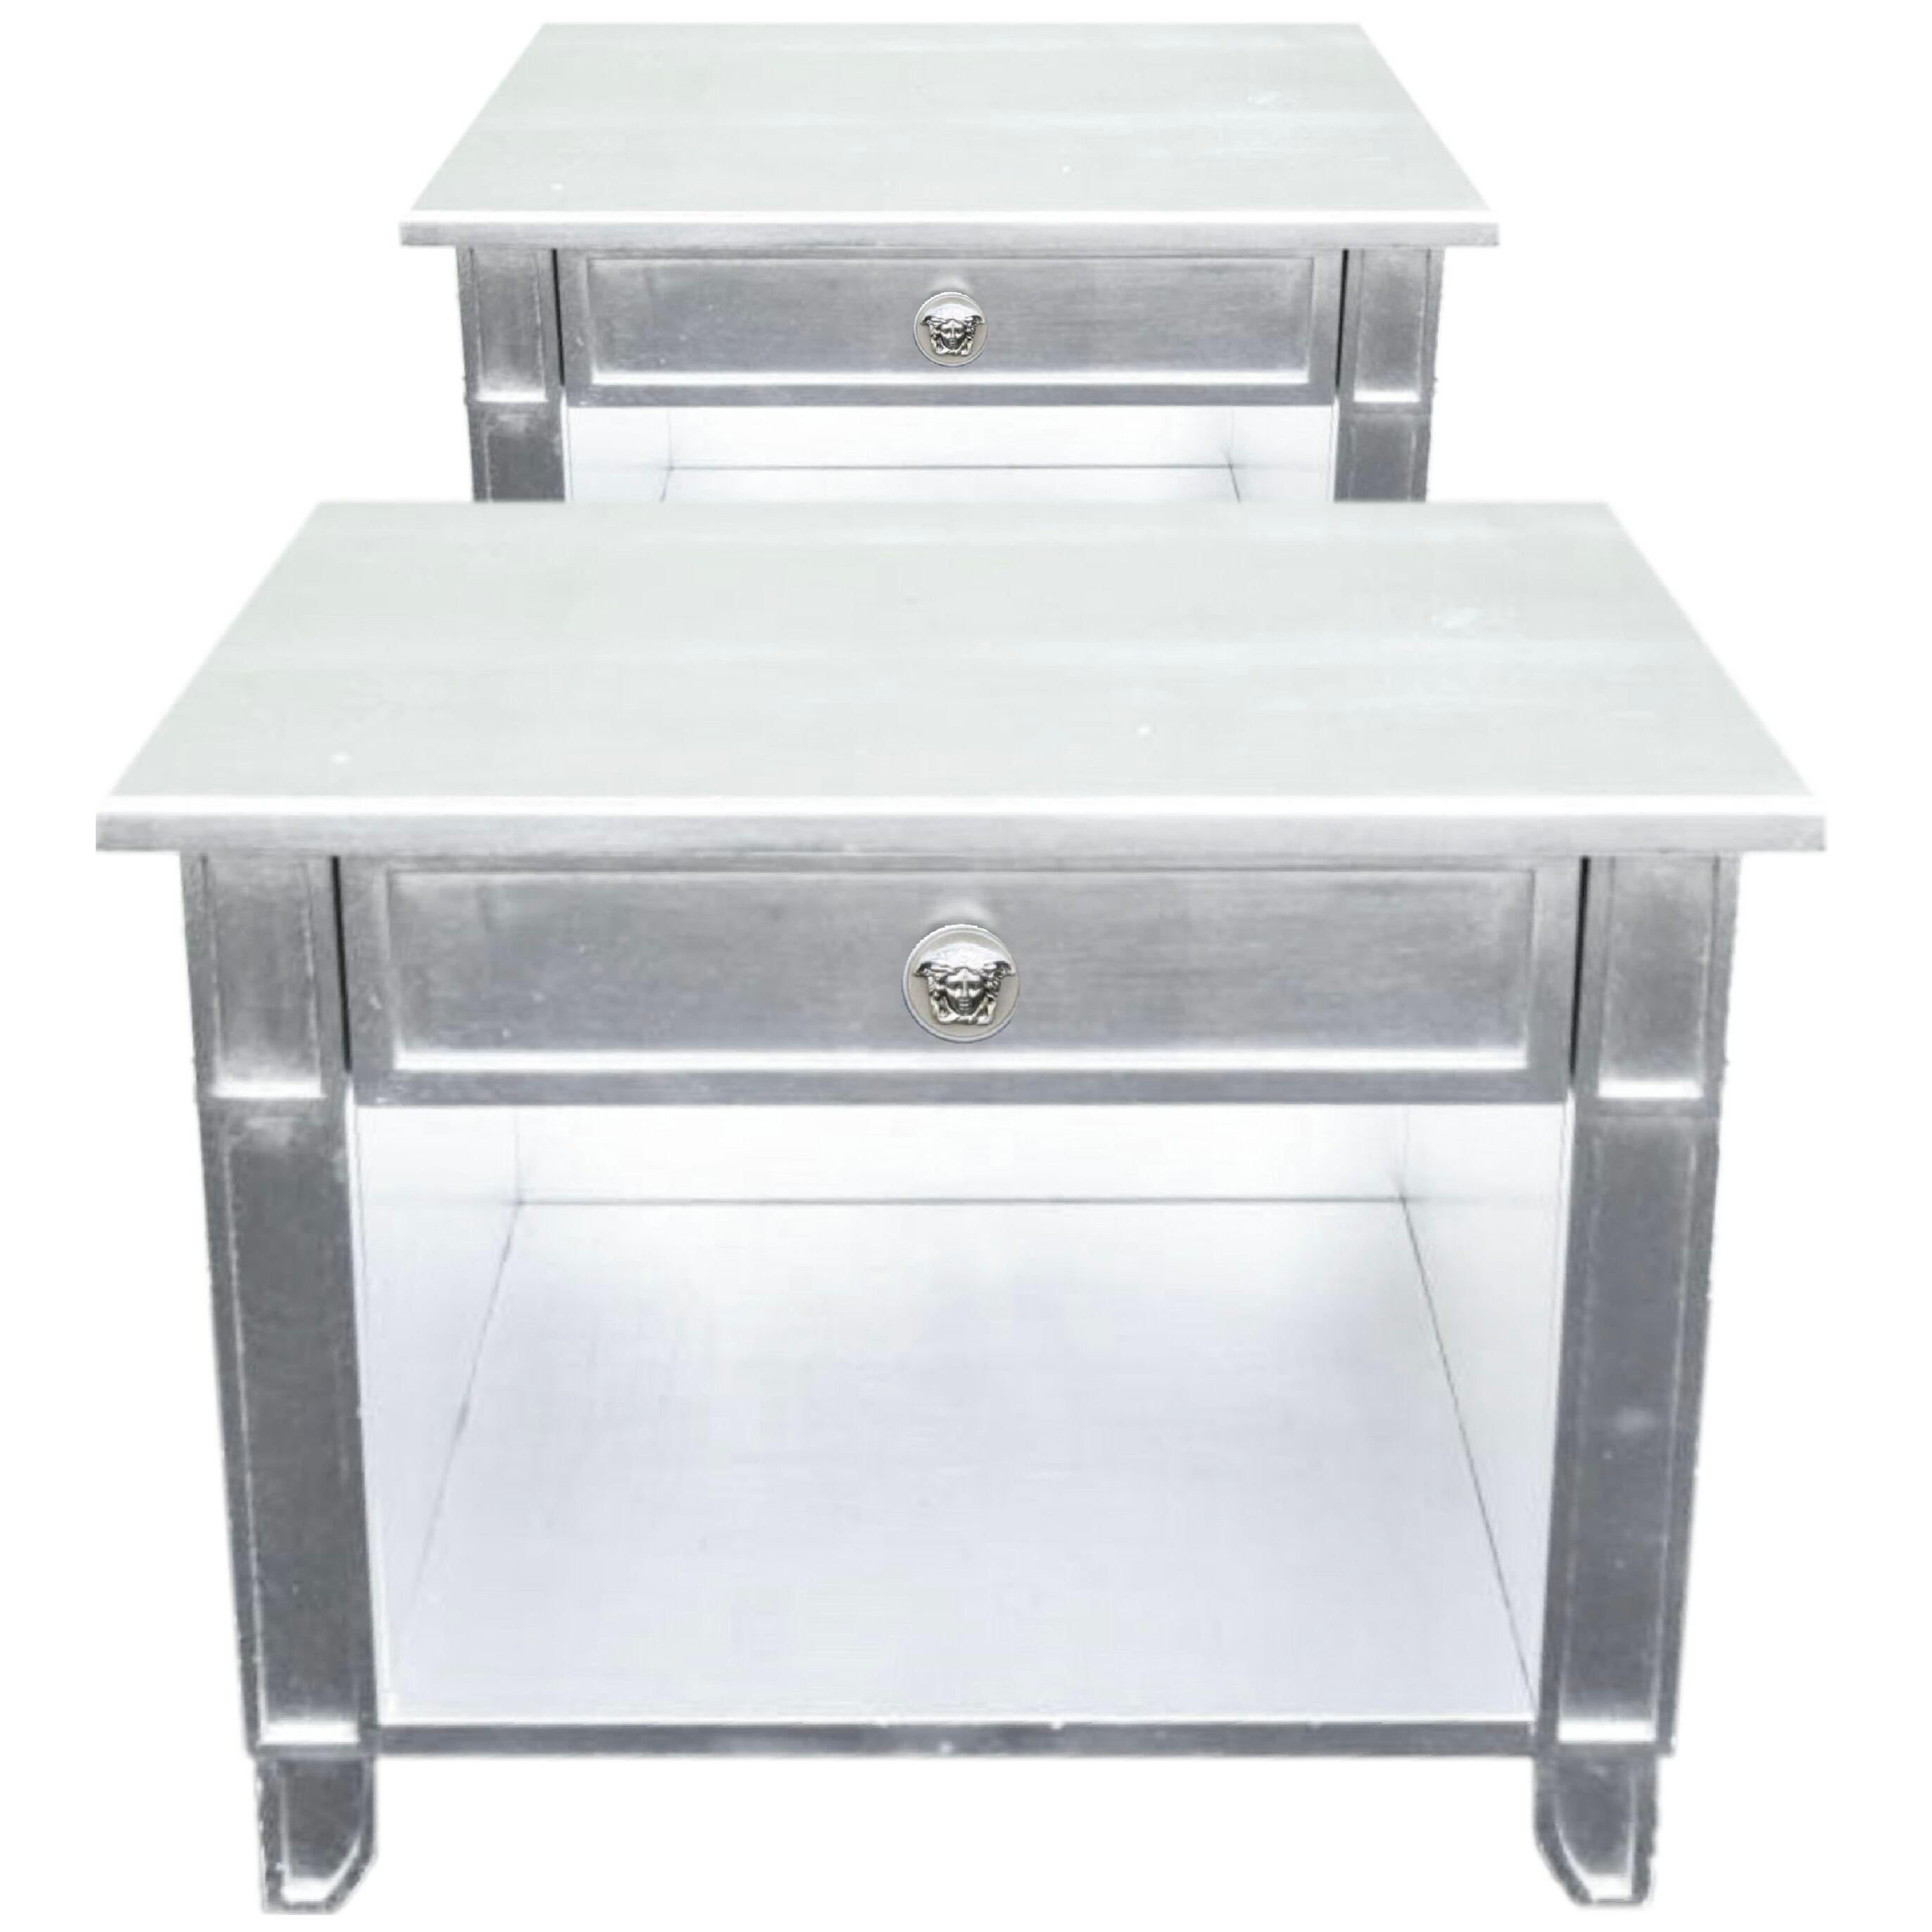 Versace Silvered Pasha End Table, Nightstands, Gianni Versace, Italy, 1994